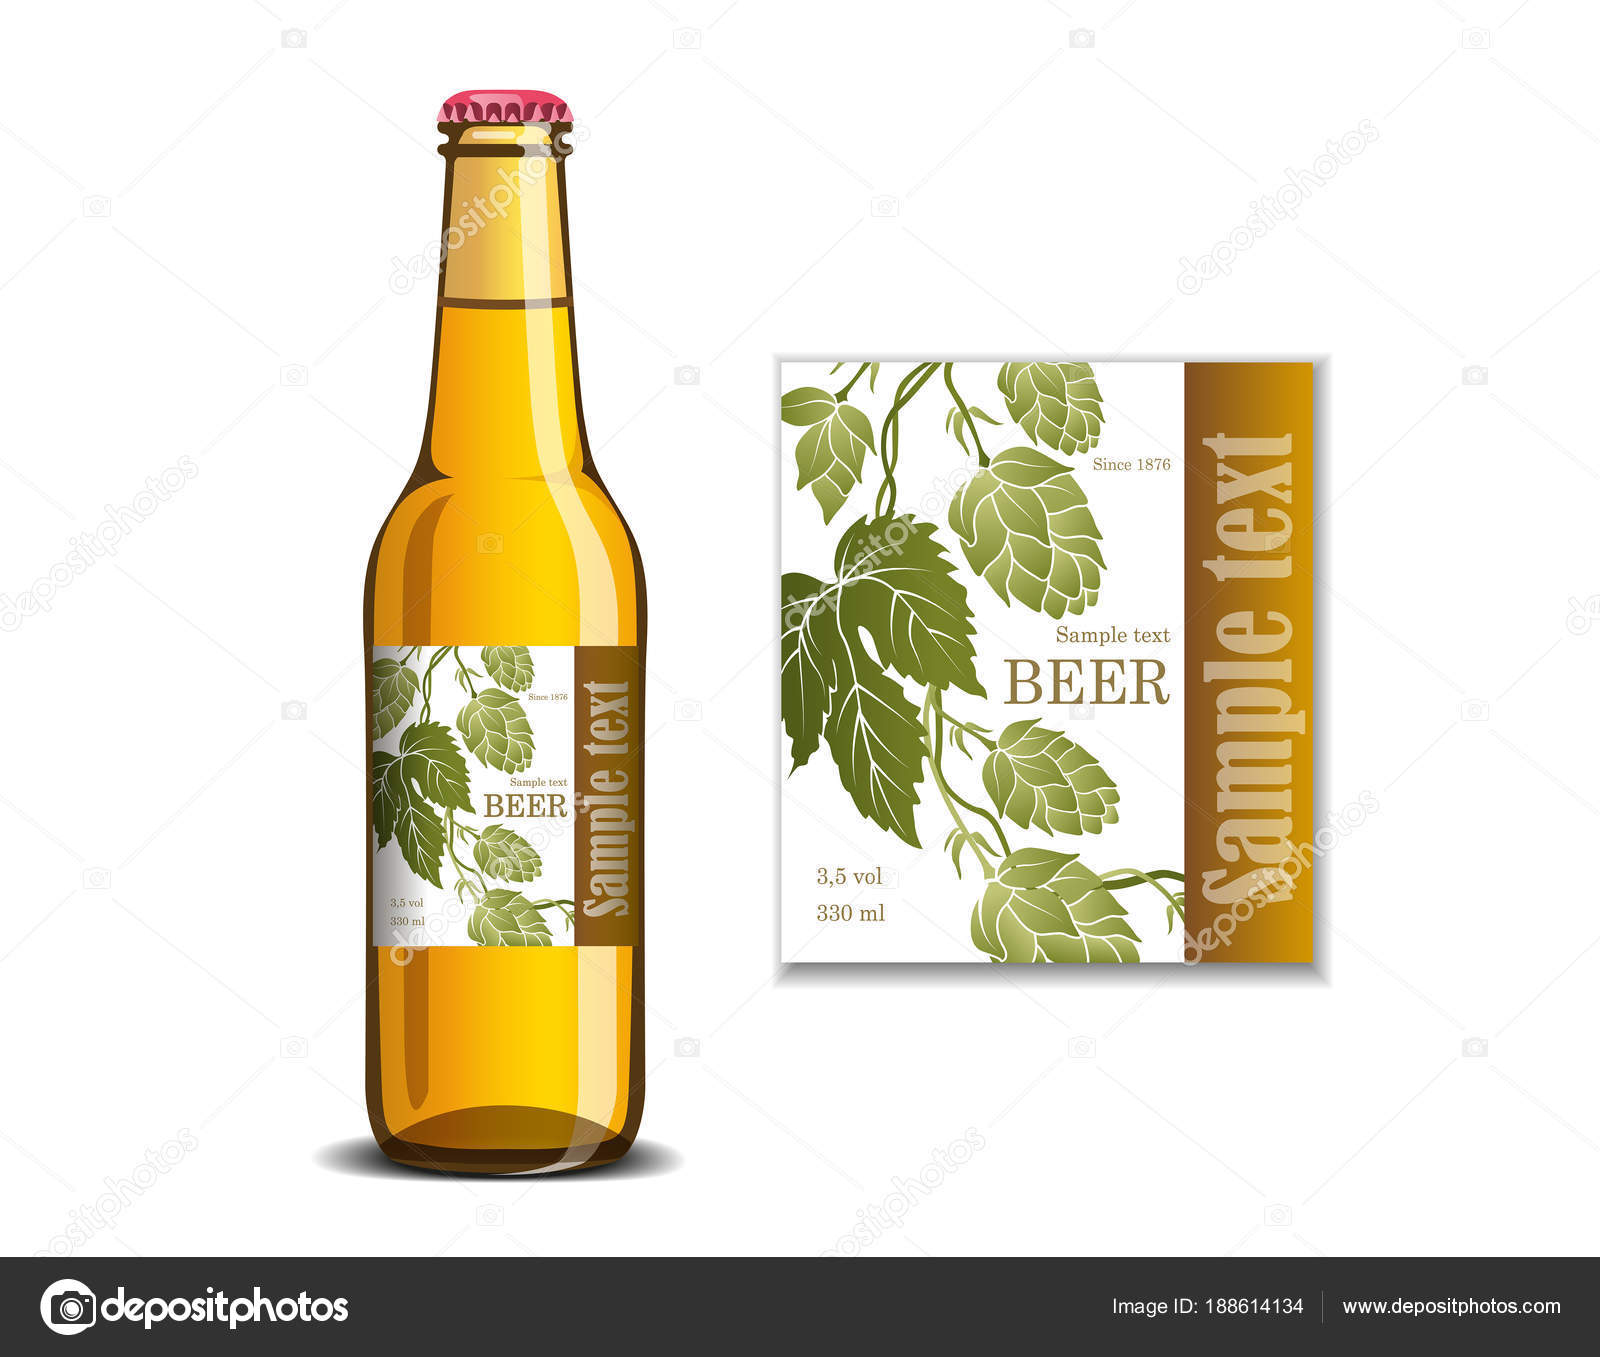 Download Beer Label On The Glass Bottle Mockup Vector Image By C Carmian Vector Stock 188614134